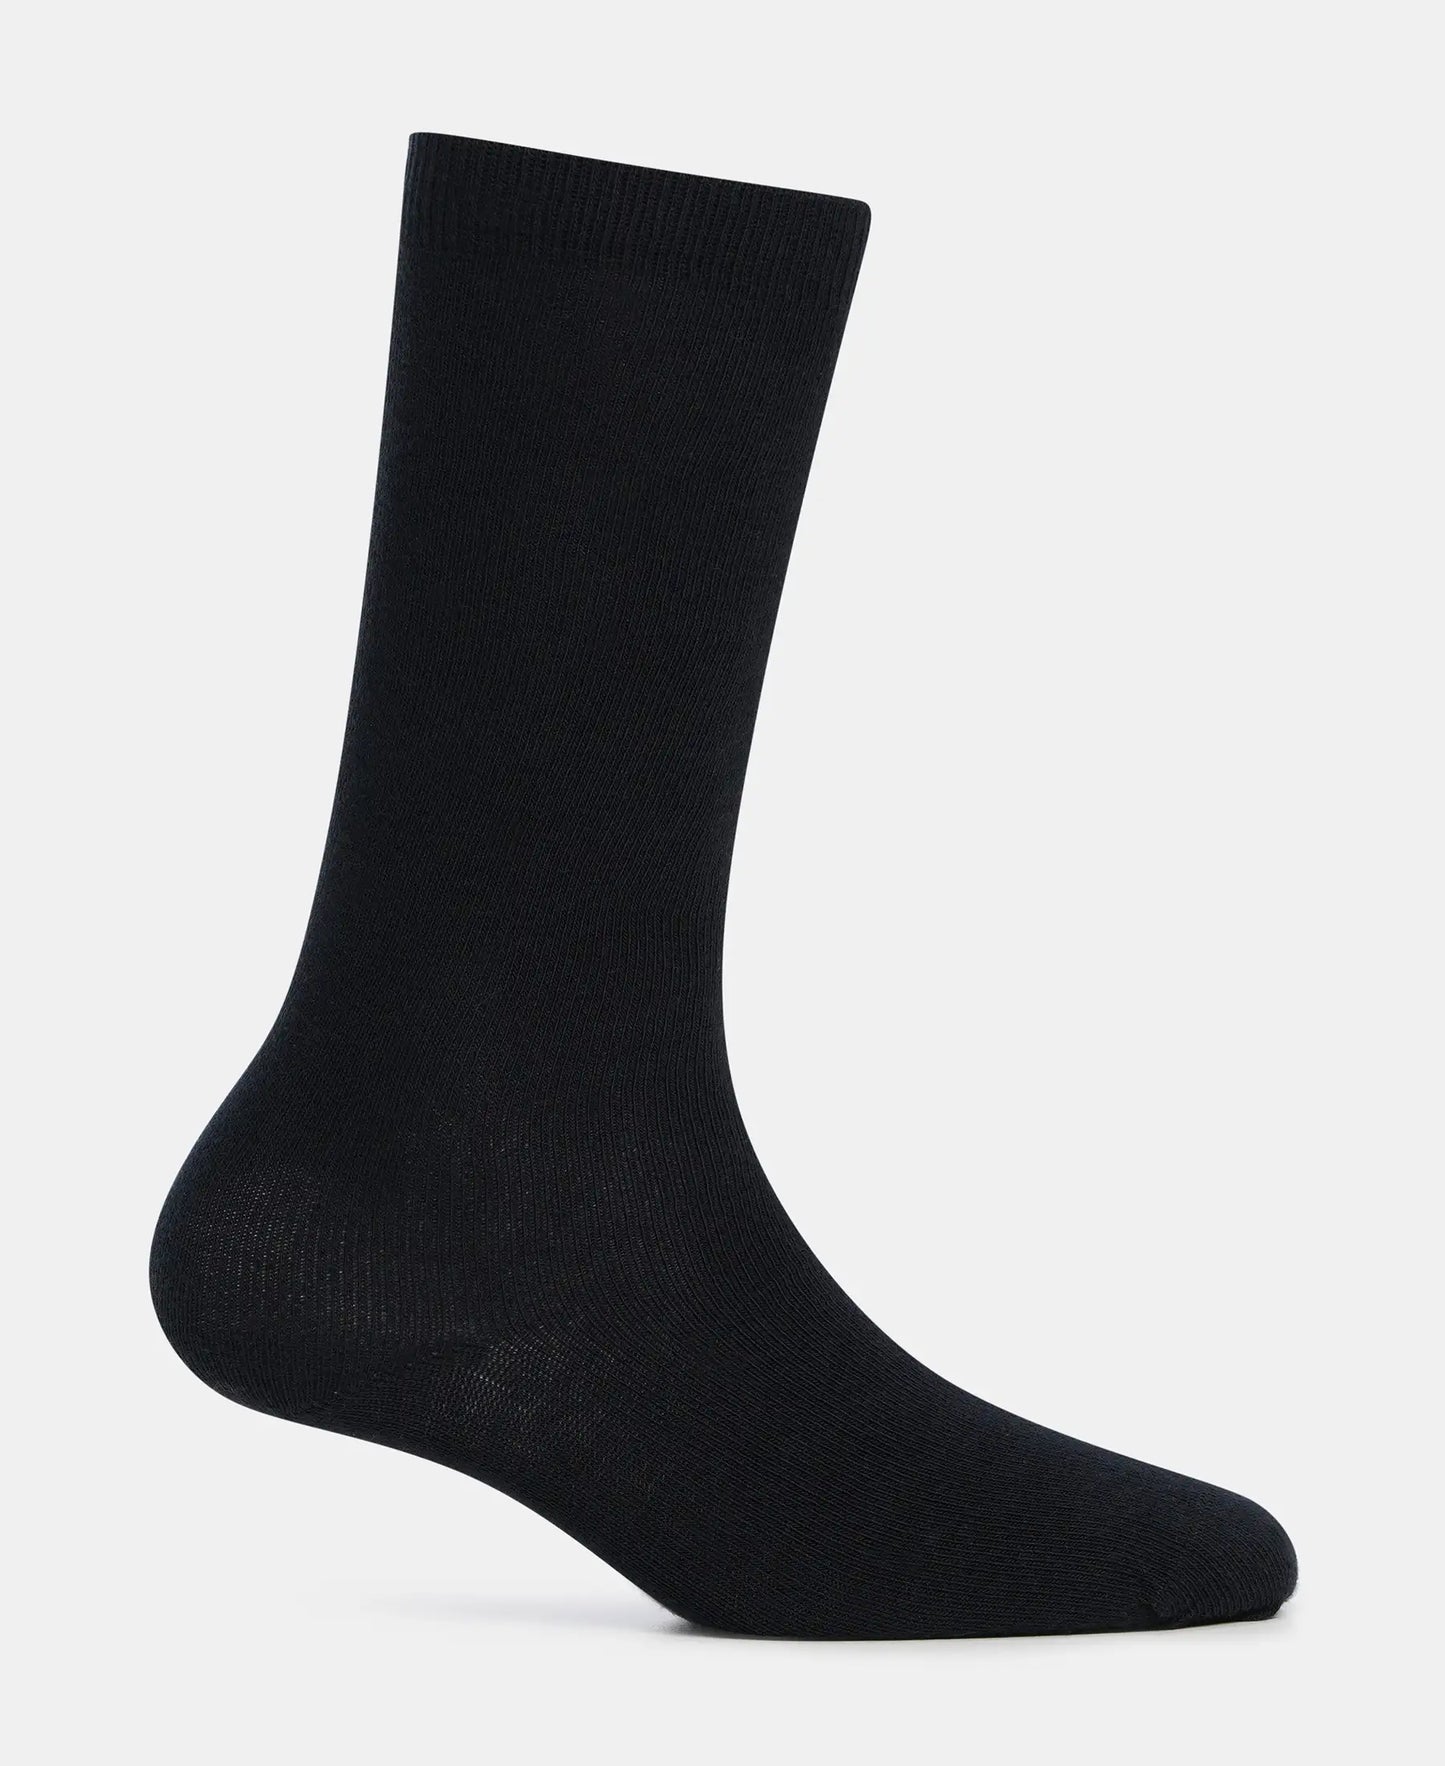 Kid's Compact Cotton Stretch Solid Knee Length Socks With StayFresh Treatment - Black-3